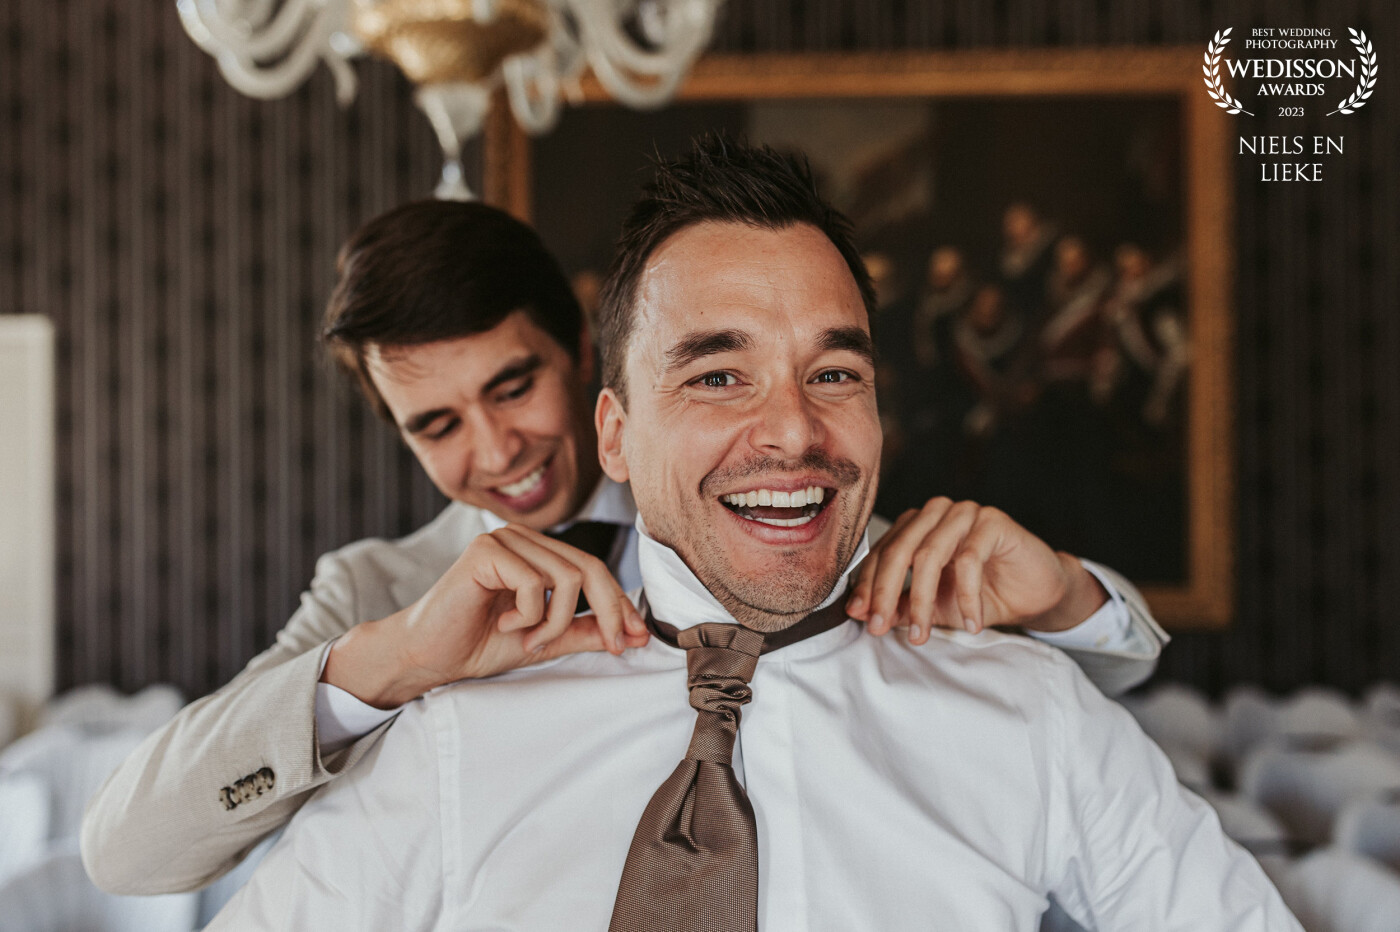 This proud groom was assisted by his brother at the magnificent Landgoed Huis de Voorst. Through the large windows, we could capture the groom's genuine smile perfectly, and the colors of the walls and the groom's tie beautifully complemented each other!